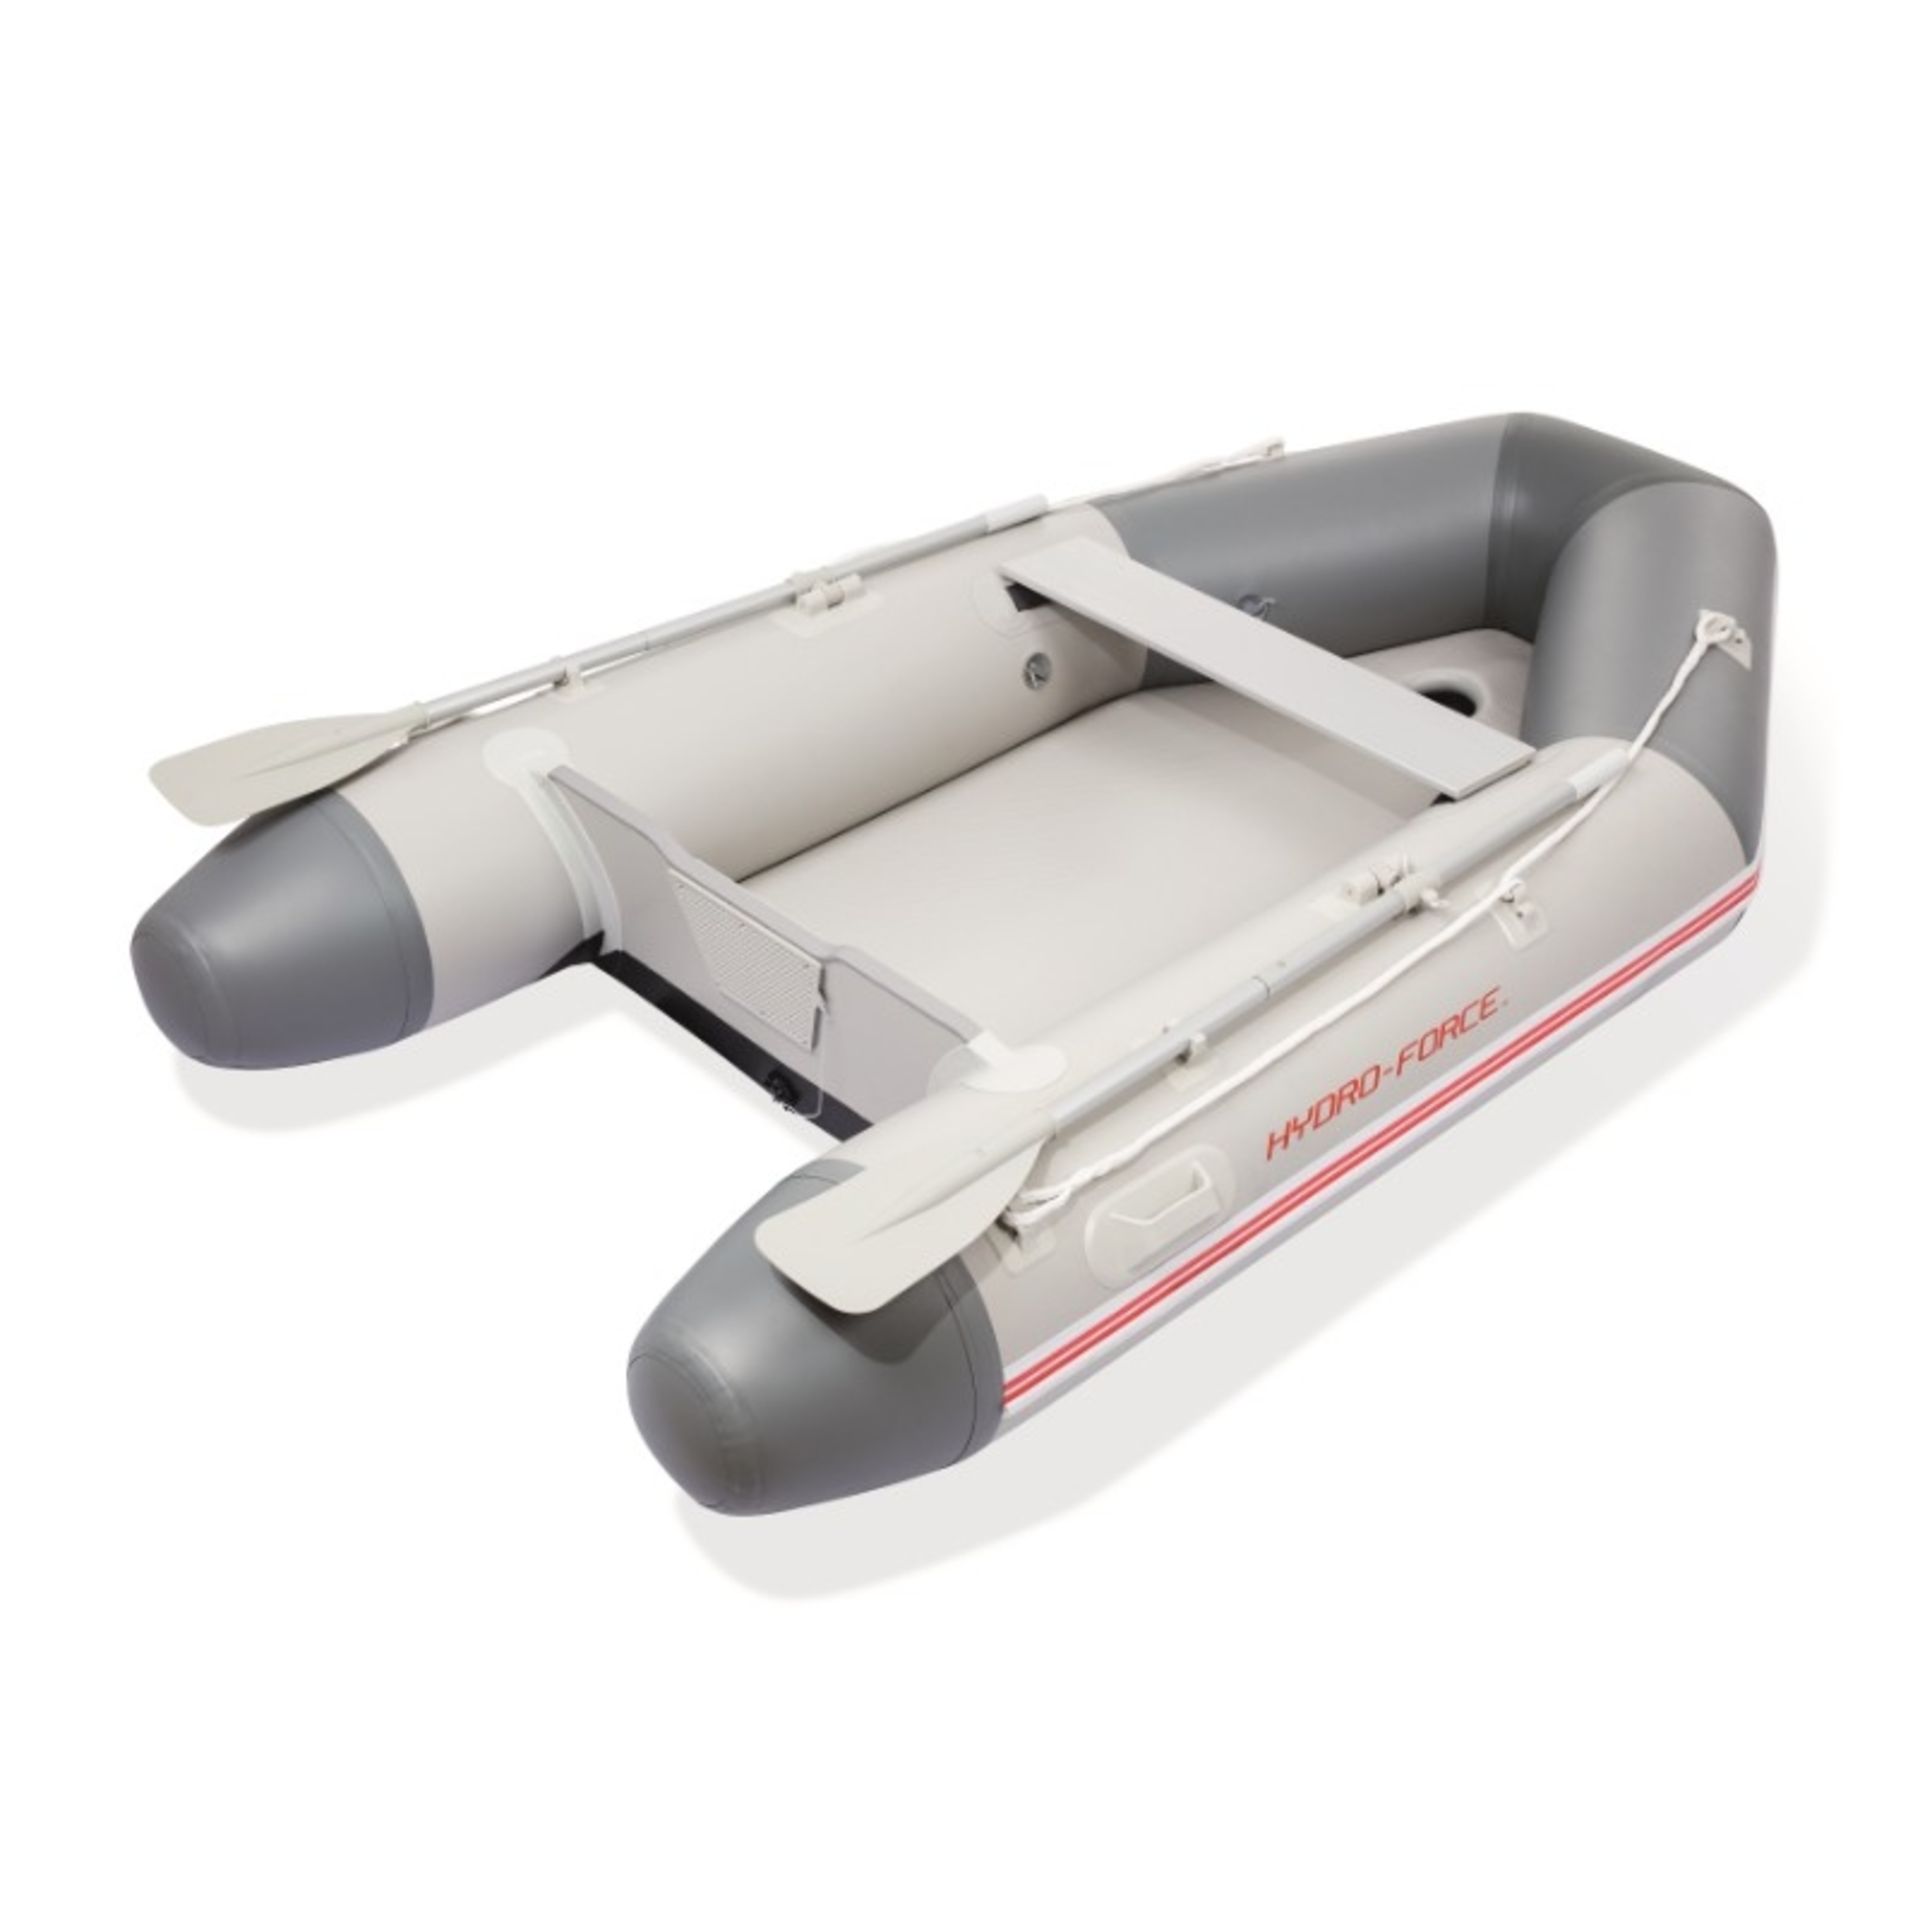 Hydro Force Caspian Pro Inflatable Boat 2.8m | 65047